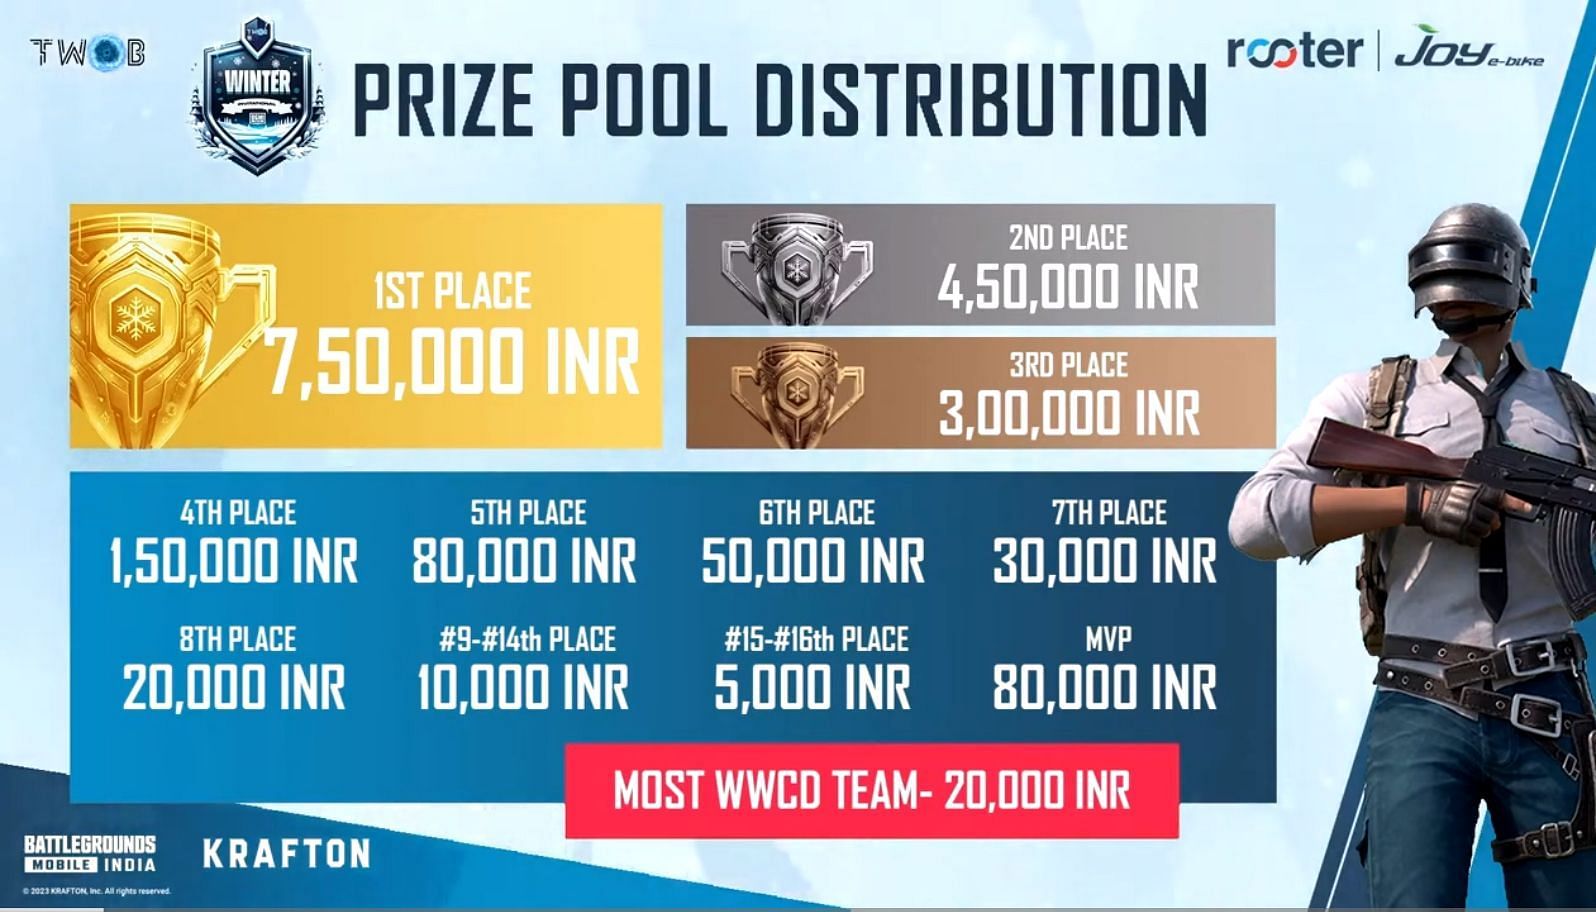 Winter Invitational features ₹21 lakh in prize money (Image via TWOB)